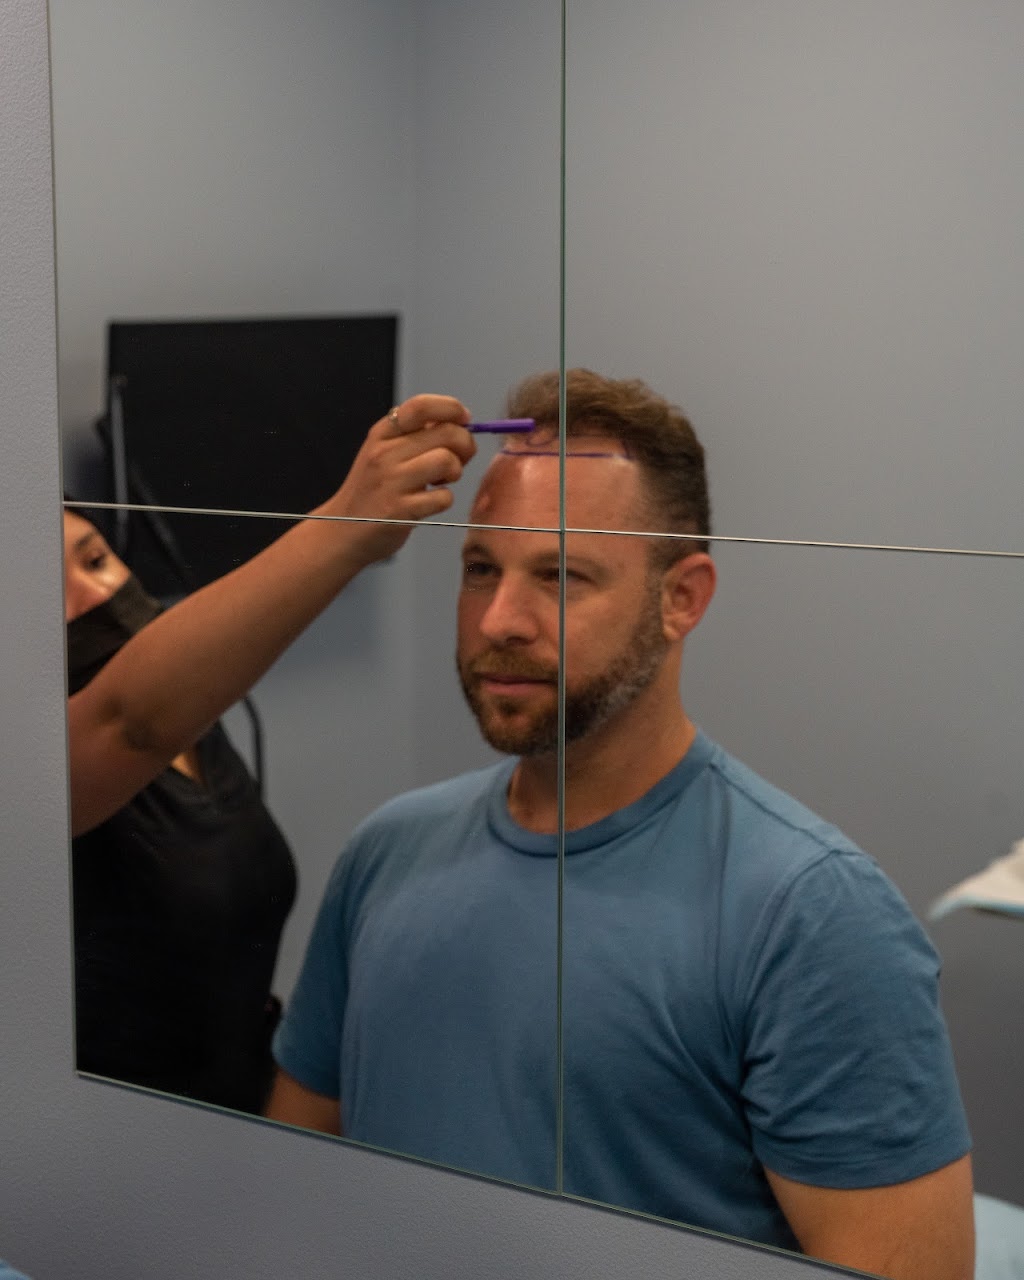 FUE Hair Transplant Solution New Jersey | 4057 Asbury Ave Suite 021, Tinton Falls, NJ 07753 | Phone: (848) 420-9970